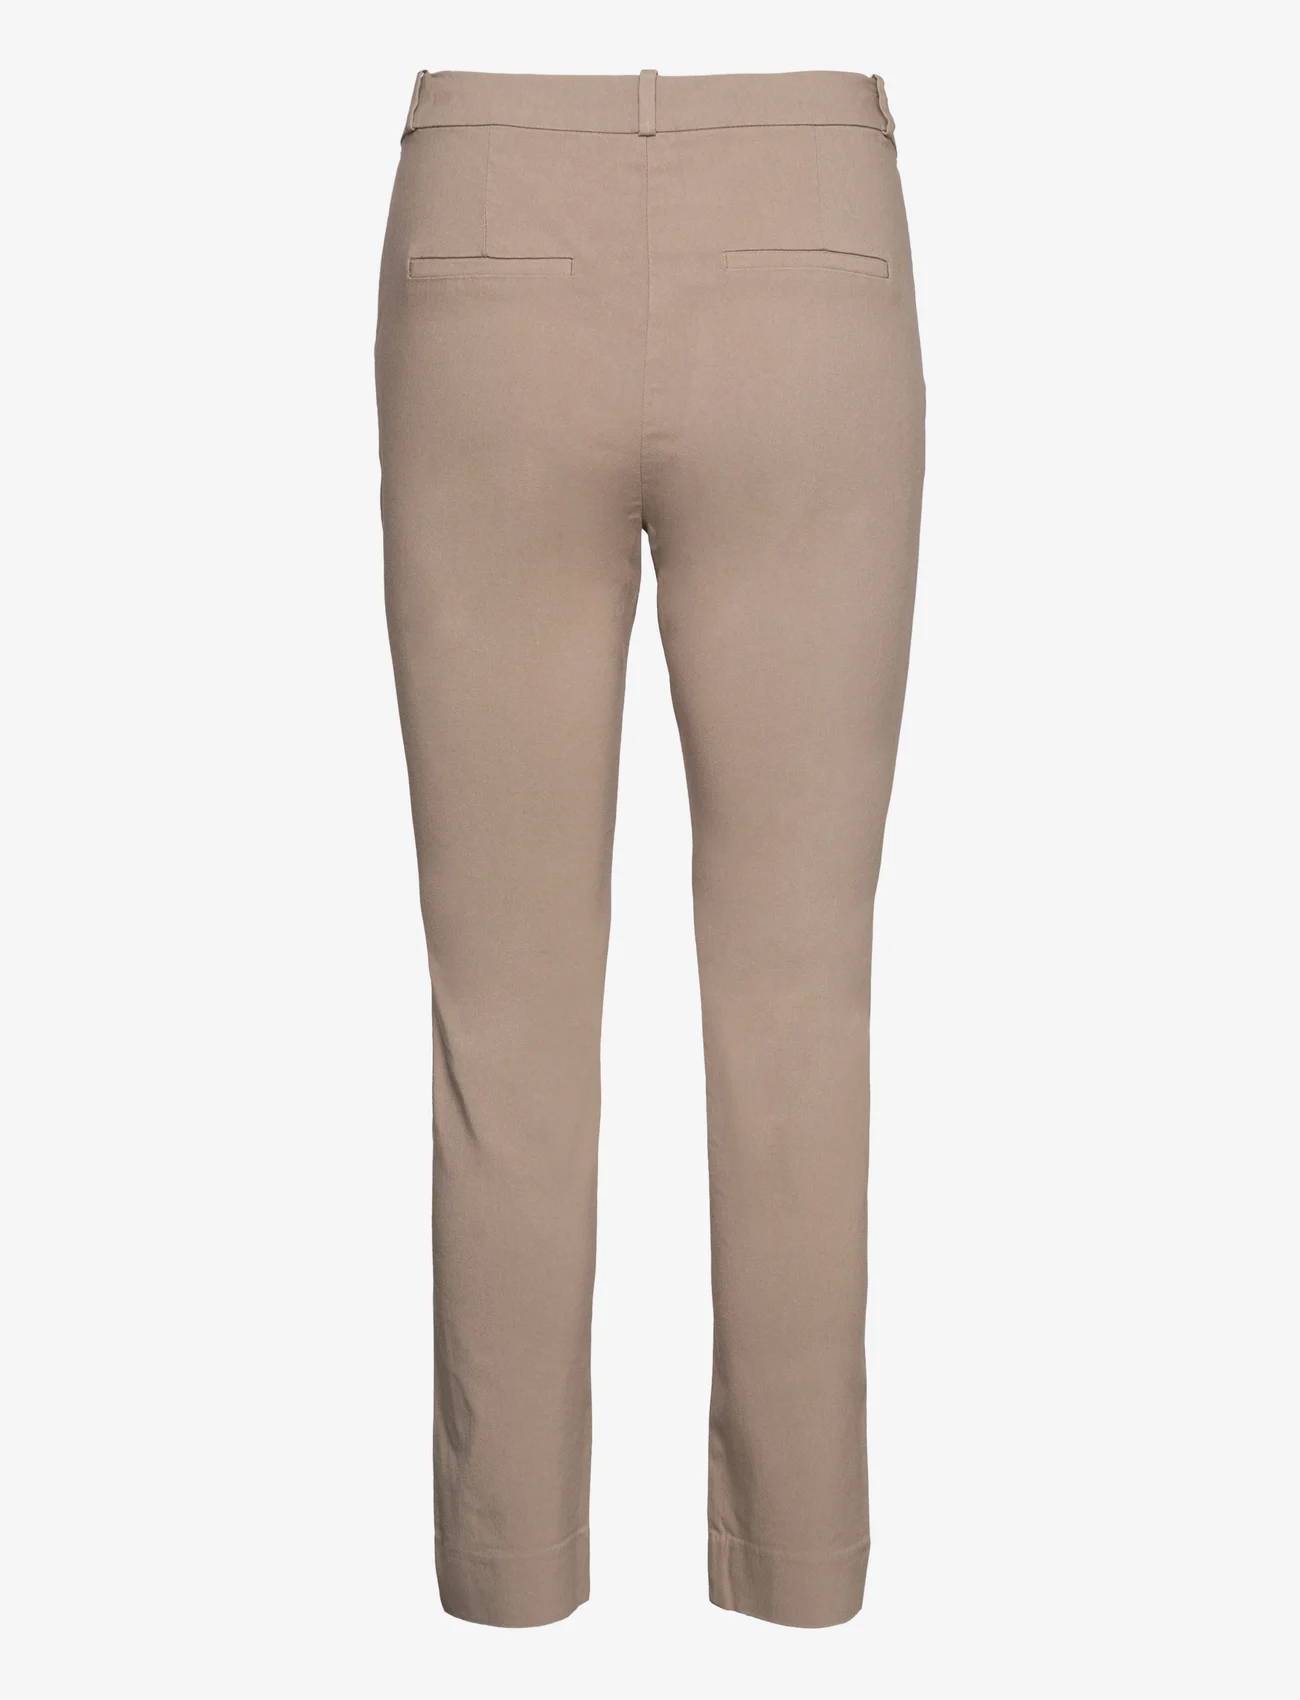 FREE/QUENT - FQSOLVEJ-ANKLE-PA - chinos - desert taupe - 1